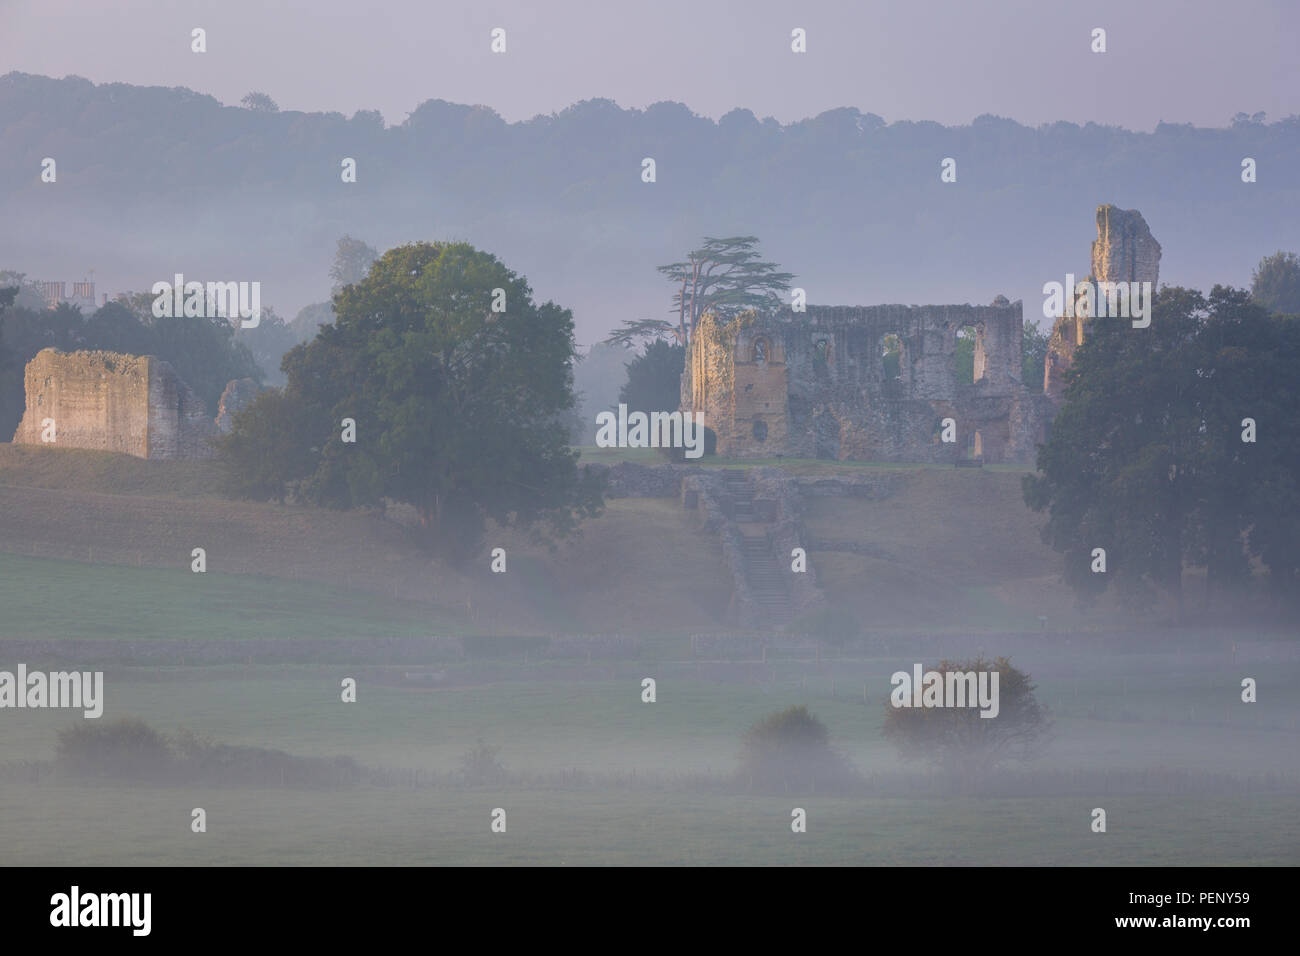 Misty dawn over Old Sherborne Castle - Sir Walter Raleigh's home, Sherborne, Dorset, England Stock Photo